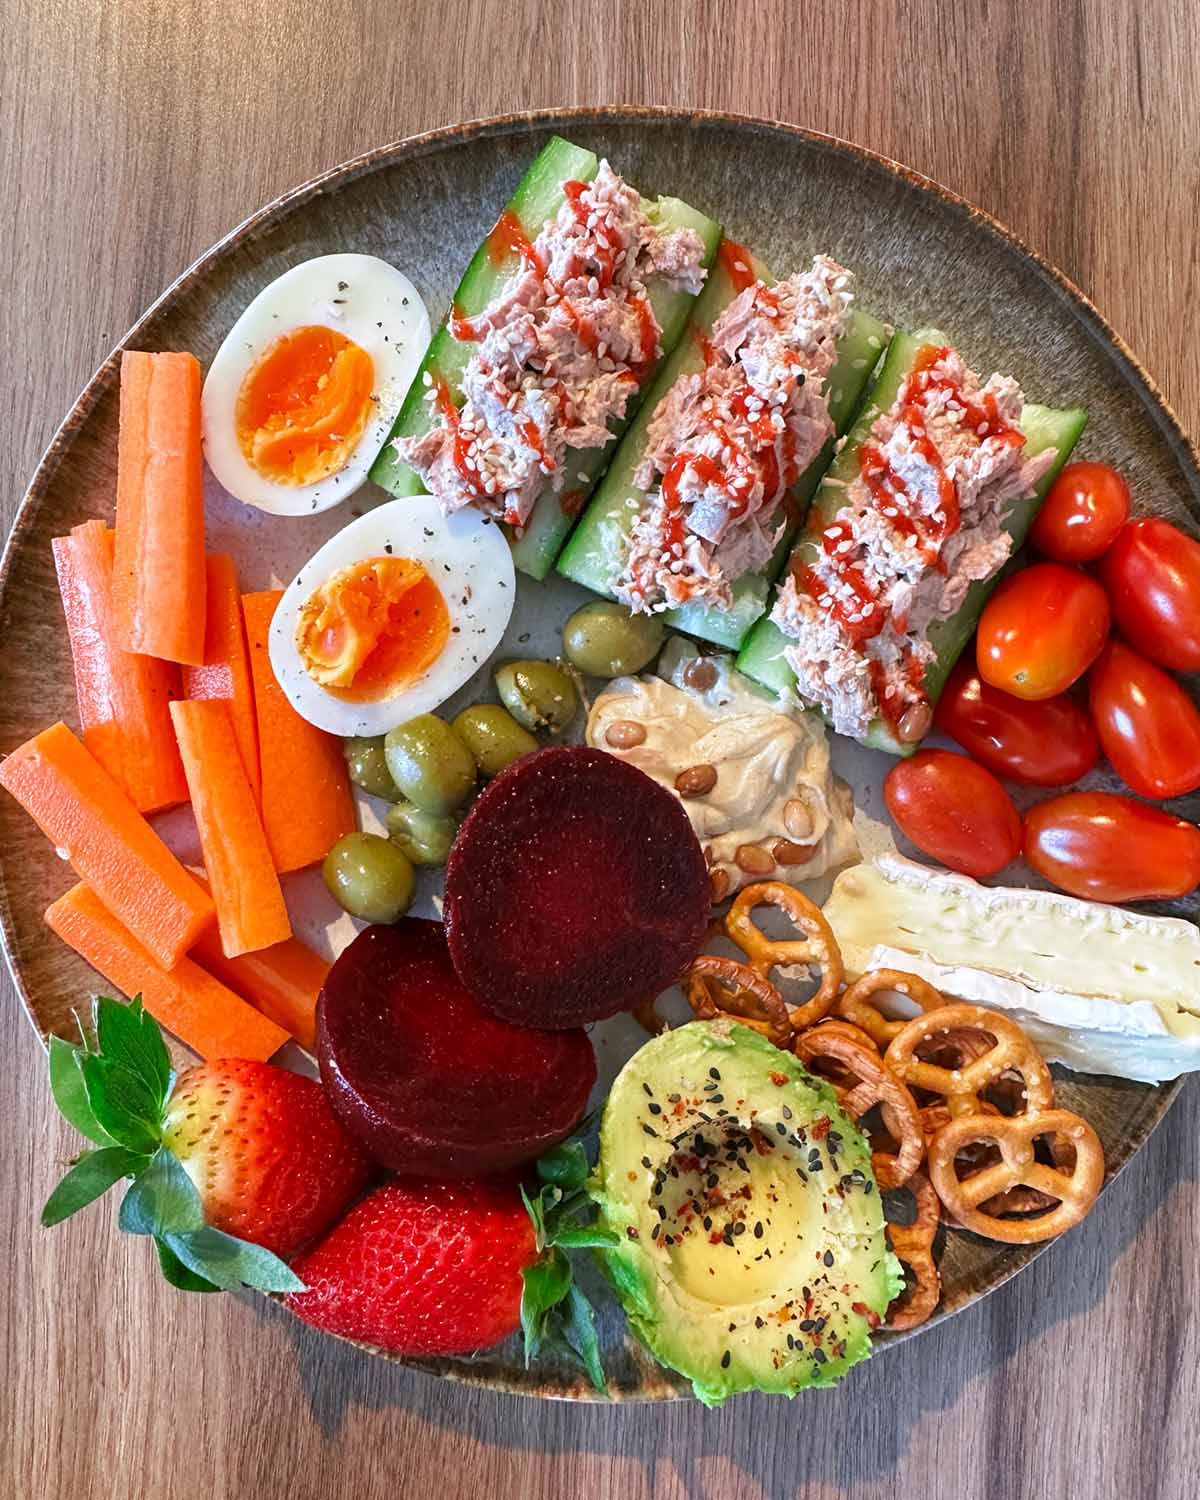 A plate of carrot battens, boiled egg, tuna mayo, beetroot, pretzels and half an avocado.